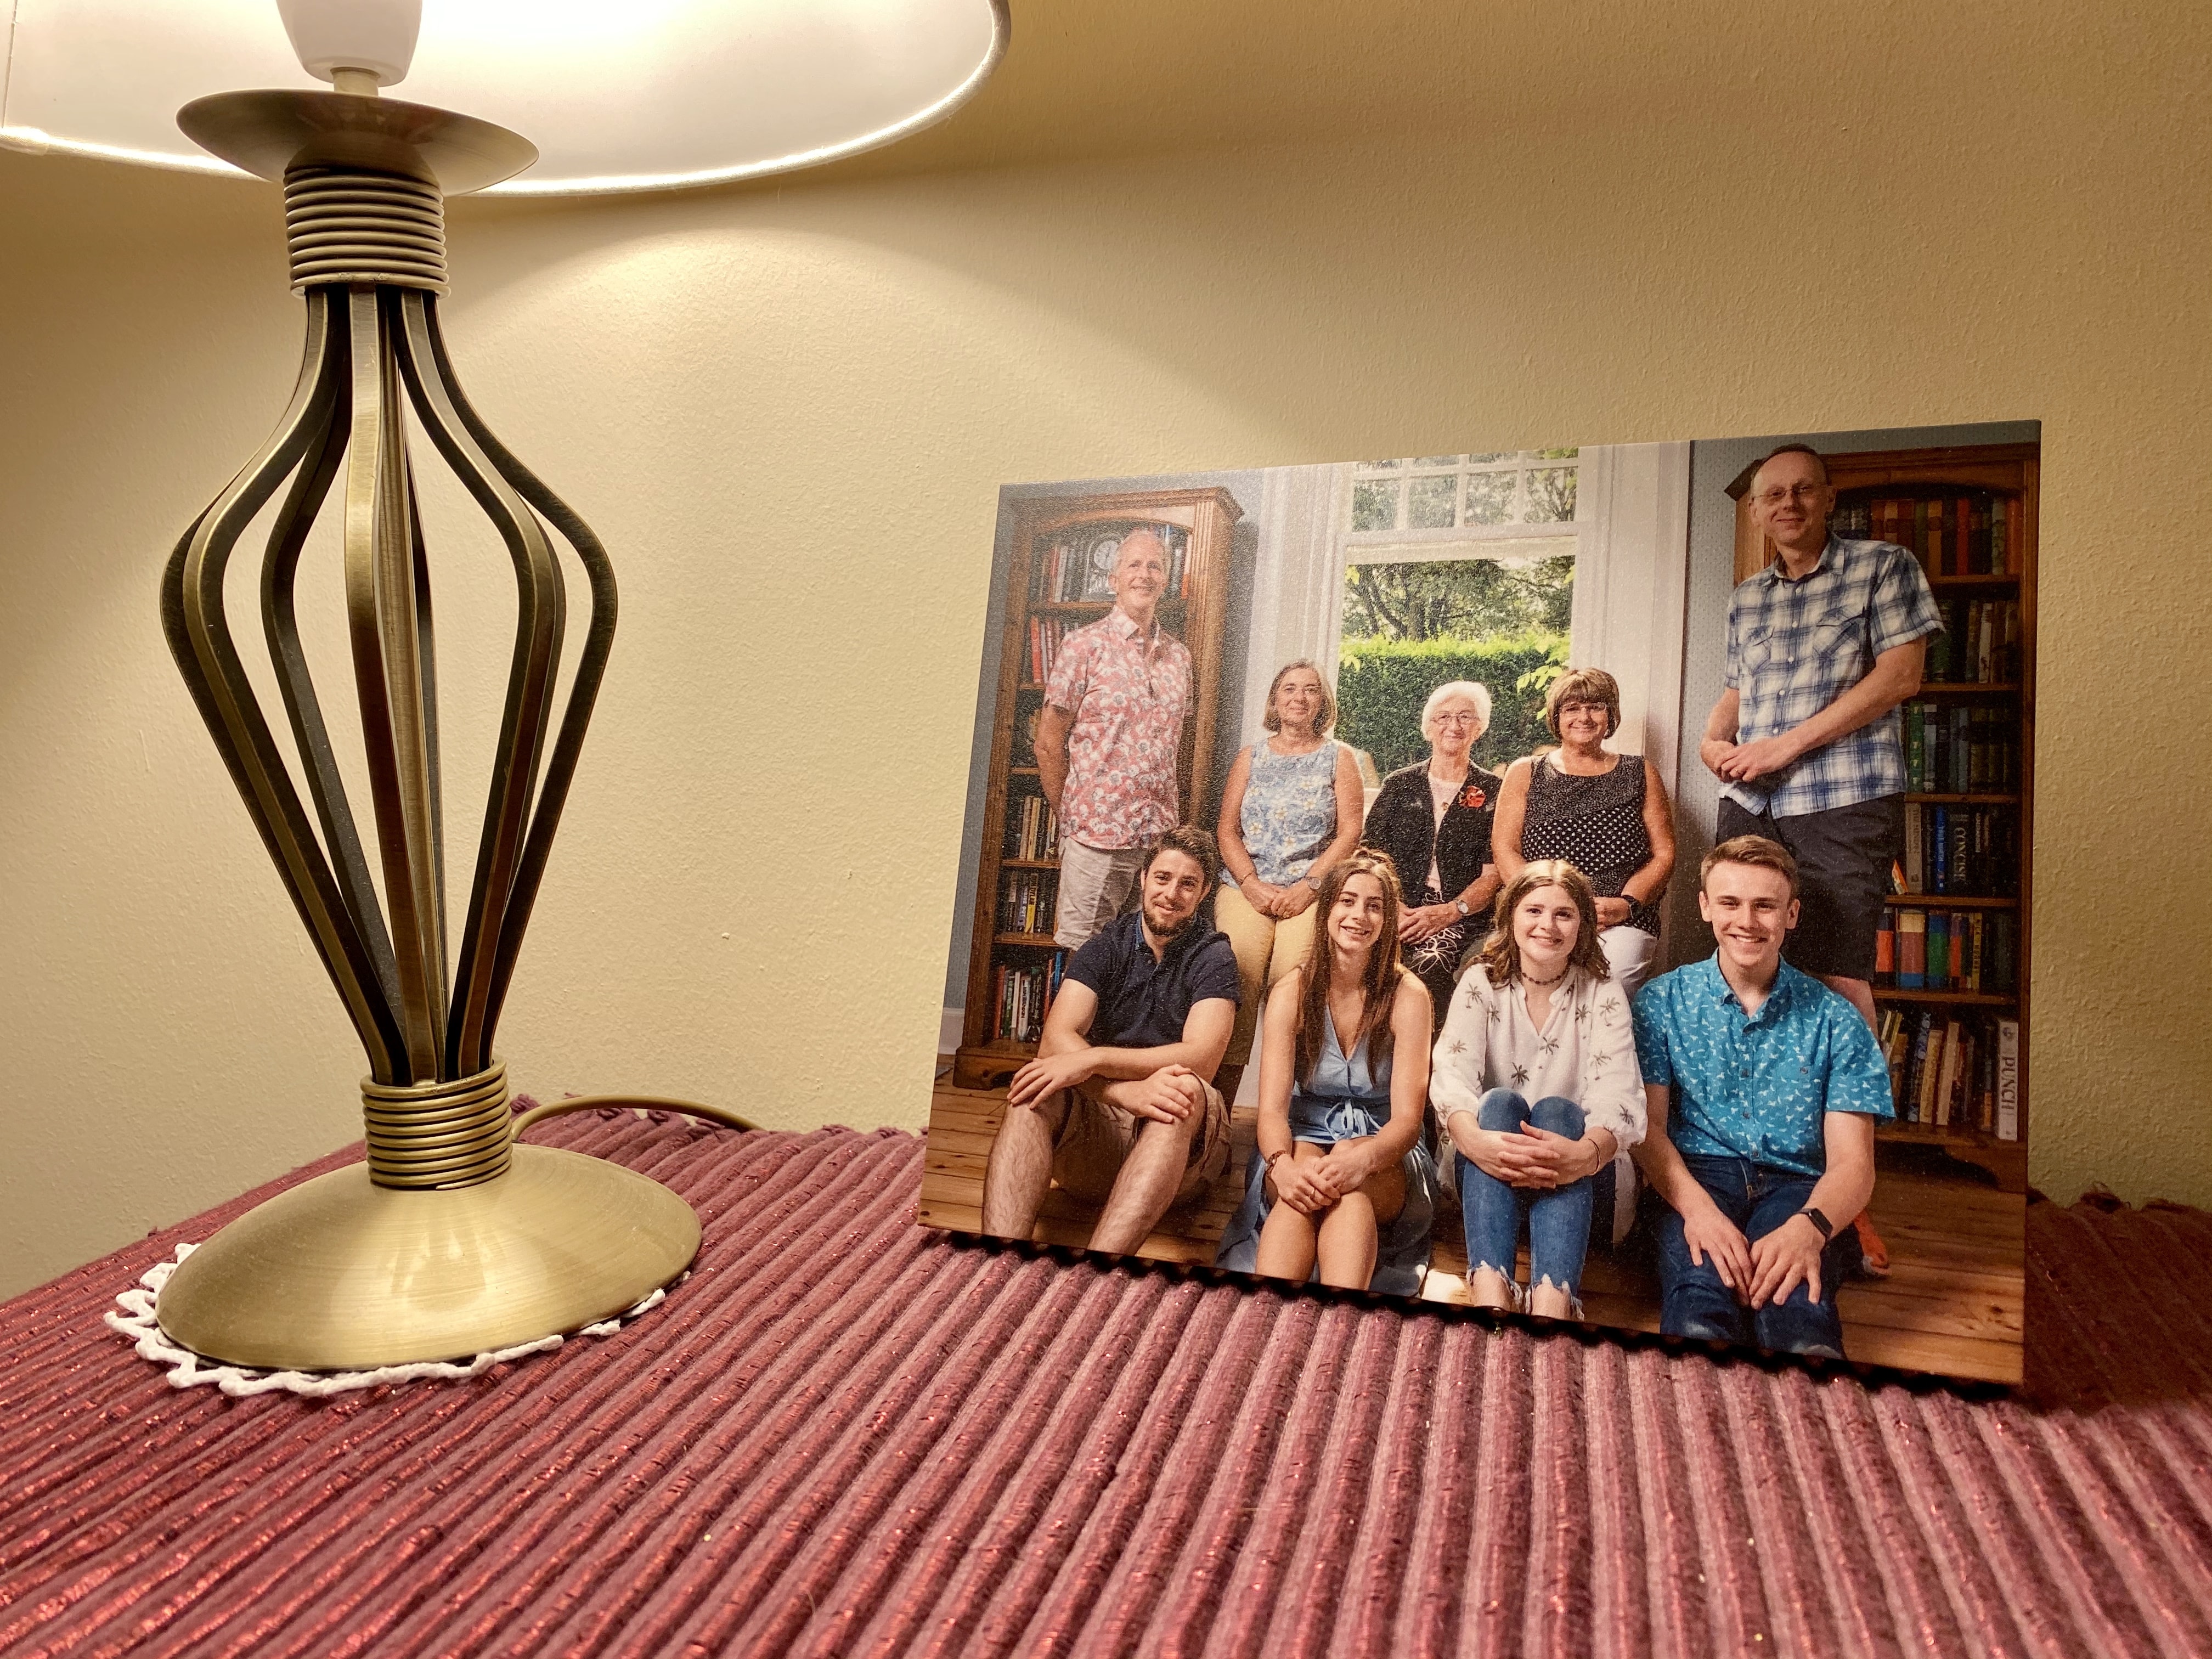 A family photo with two rows of people of differing ages, printed on a frameless panel and situated under a desk lamp.